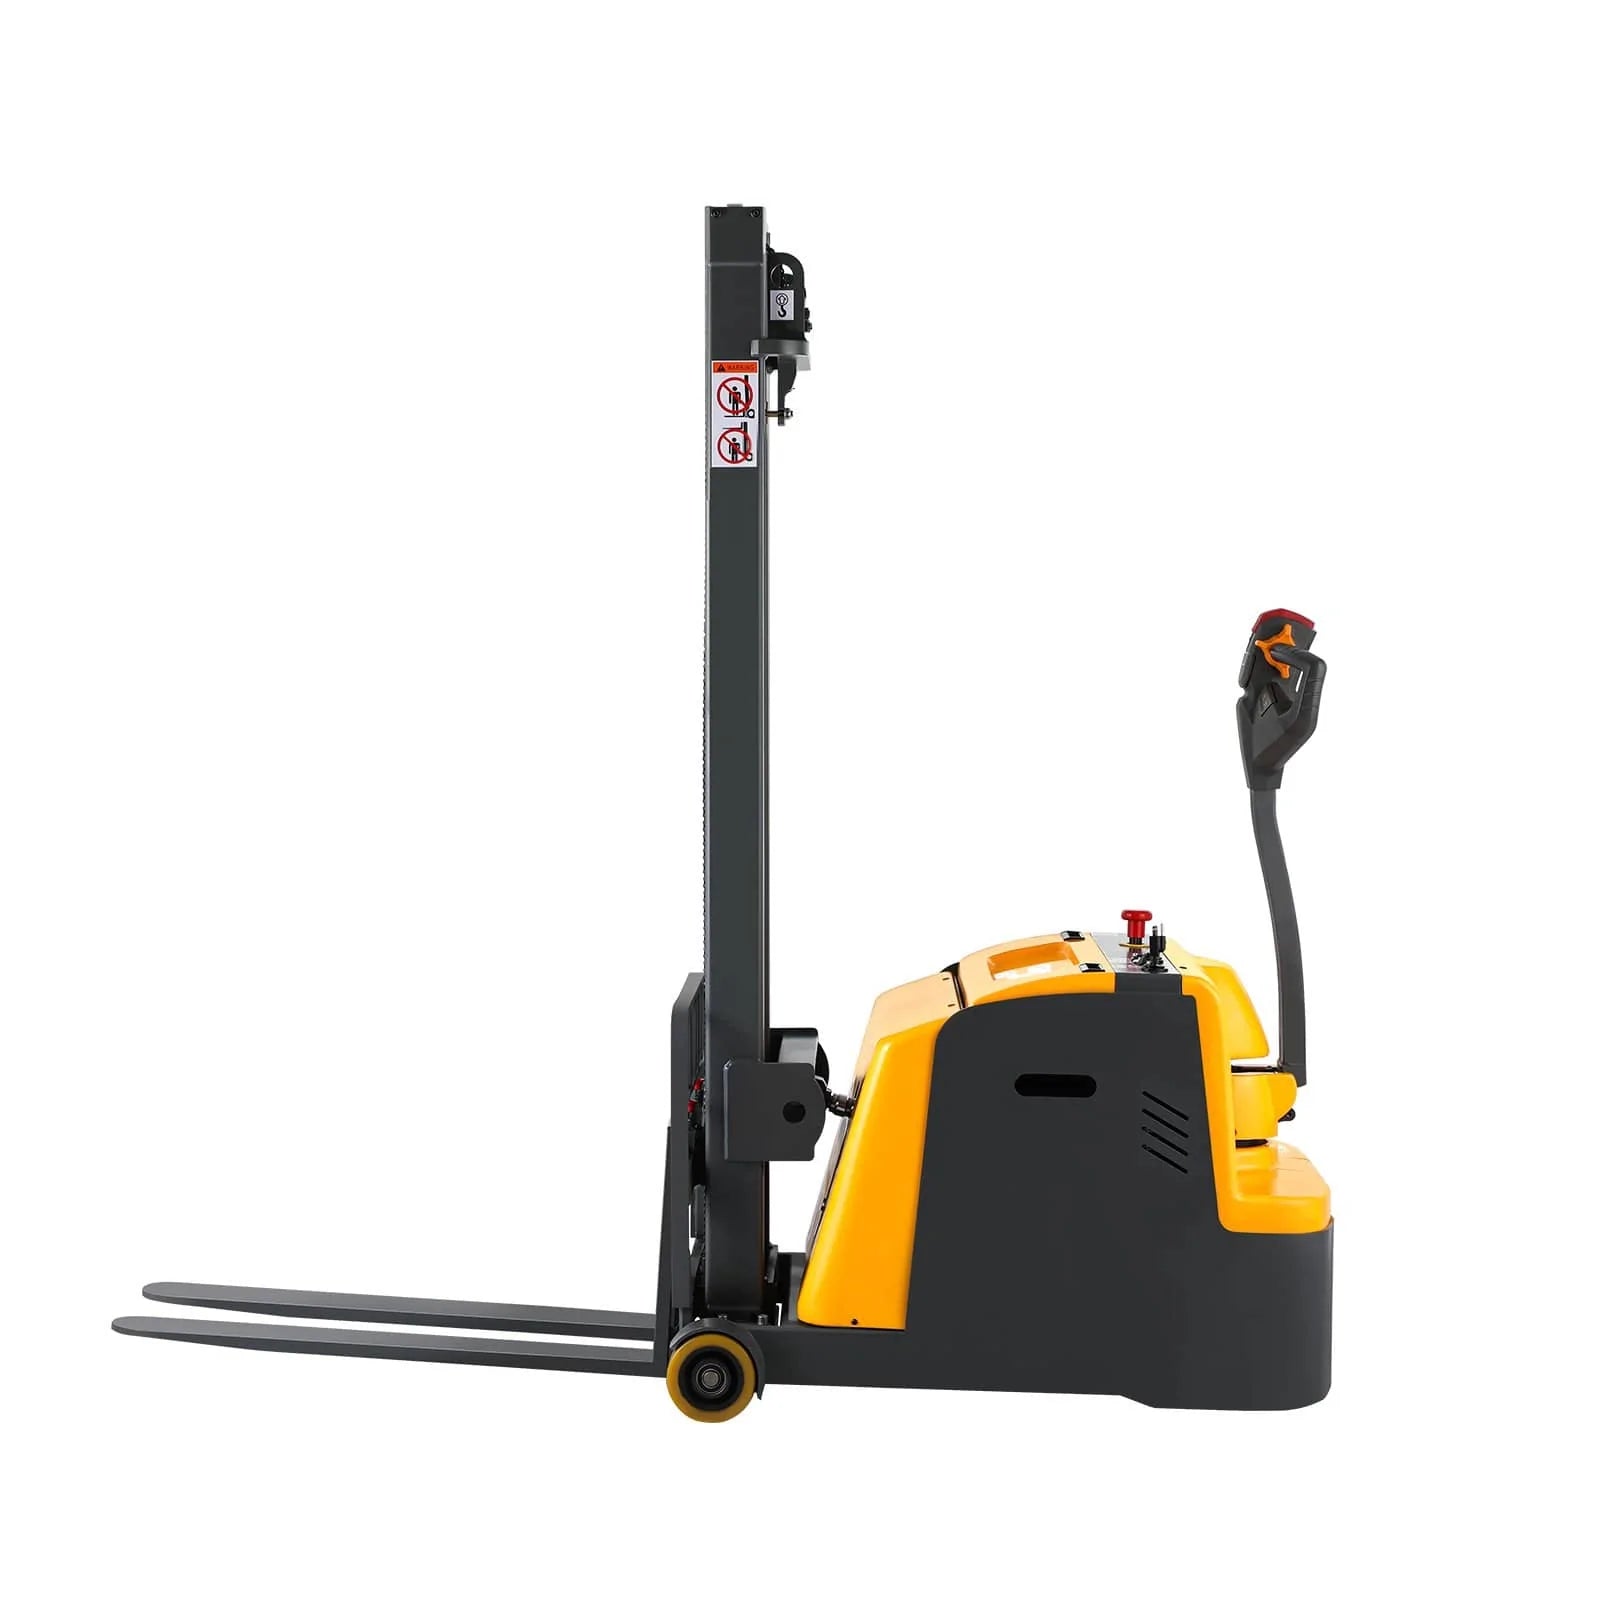 Apollolift, Apollolift A-3031 Counterbalanced Electric Stacker 118" Lifting Height 1212 lbs. Capacity New